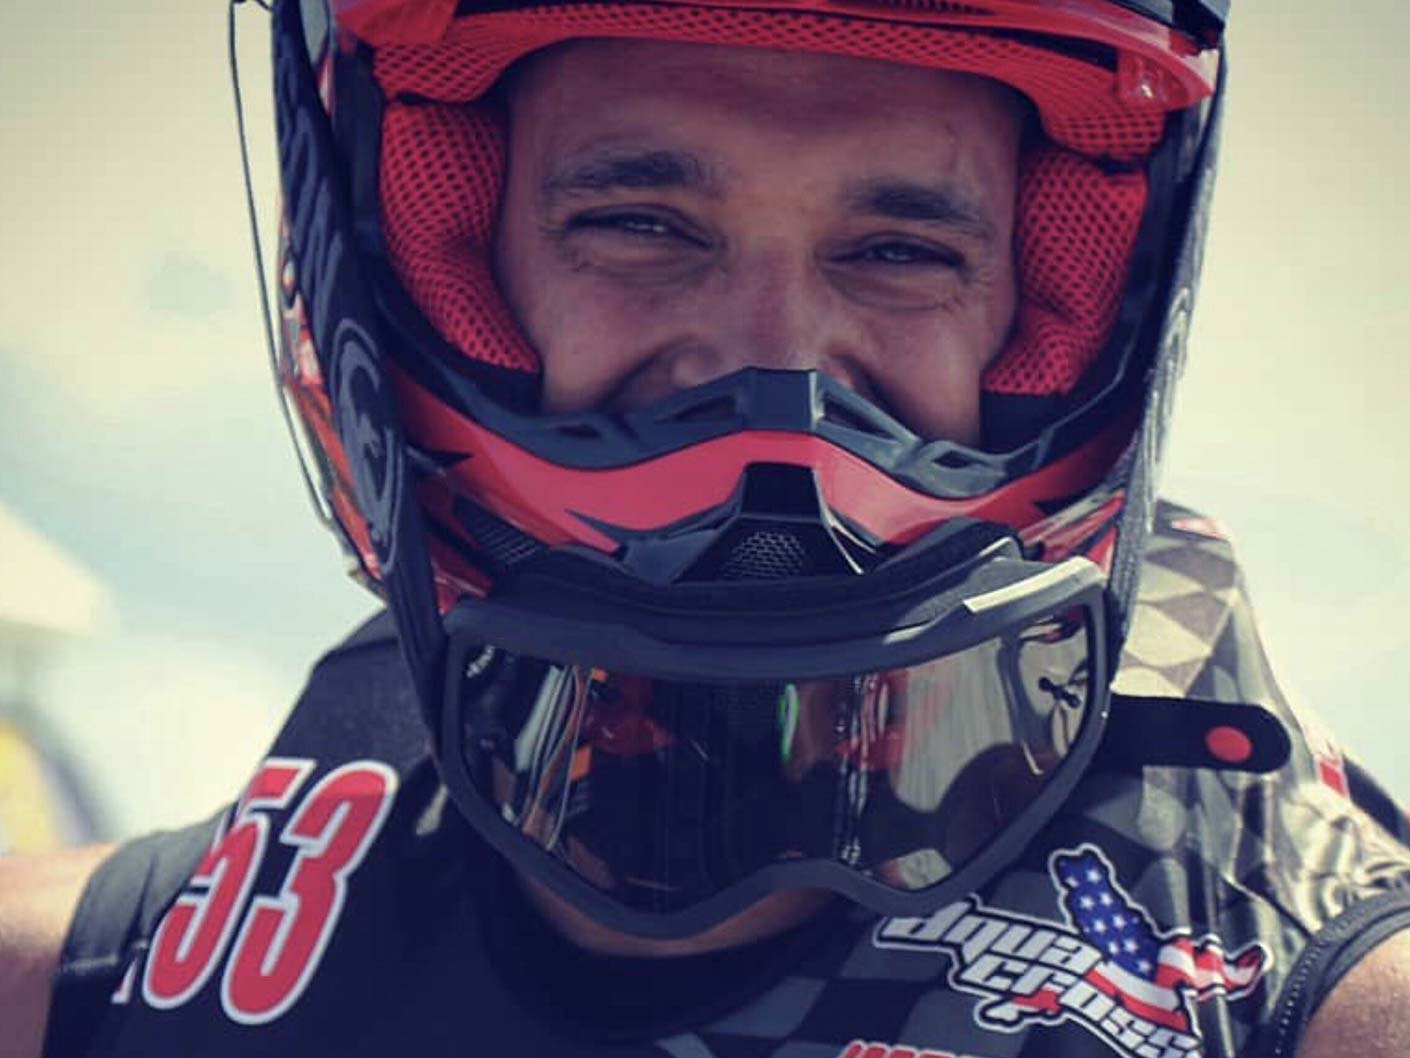 Anthony Radetic smiling before a PWC race